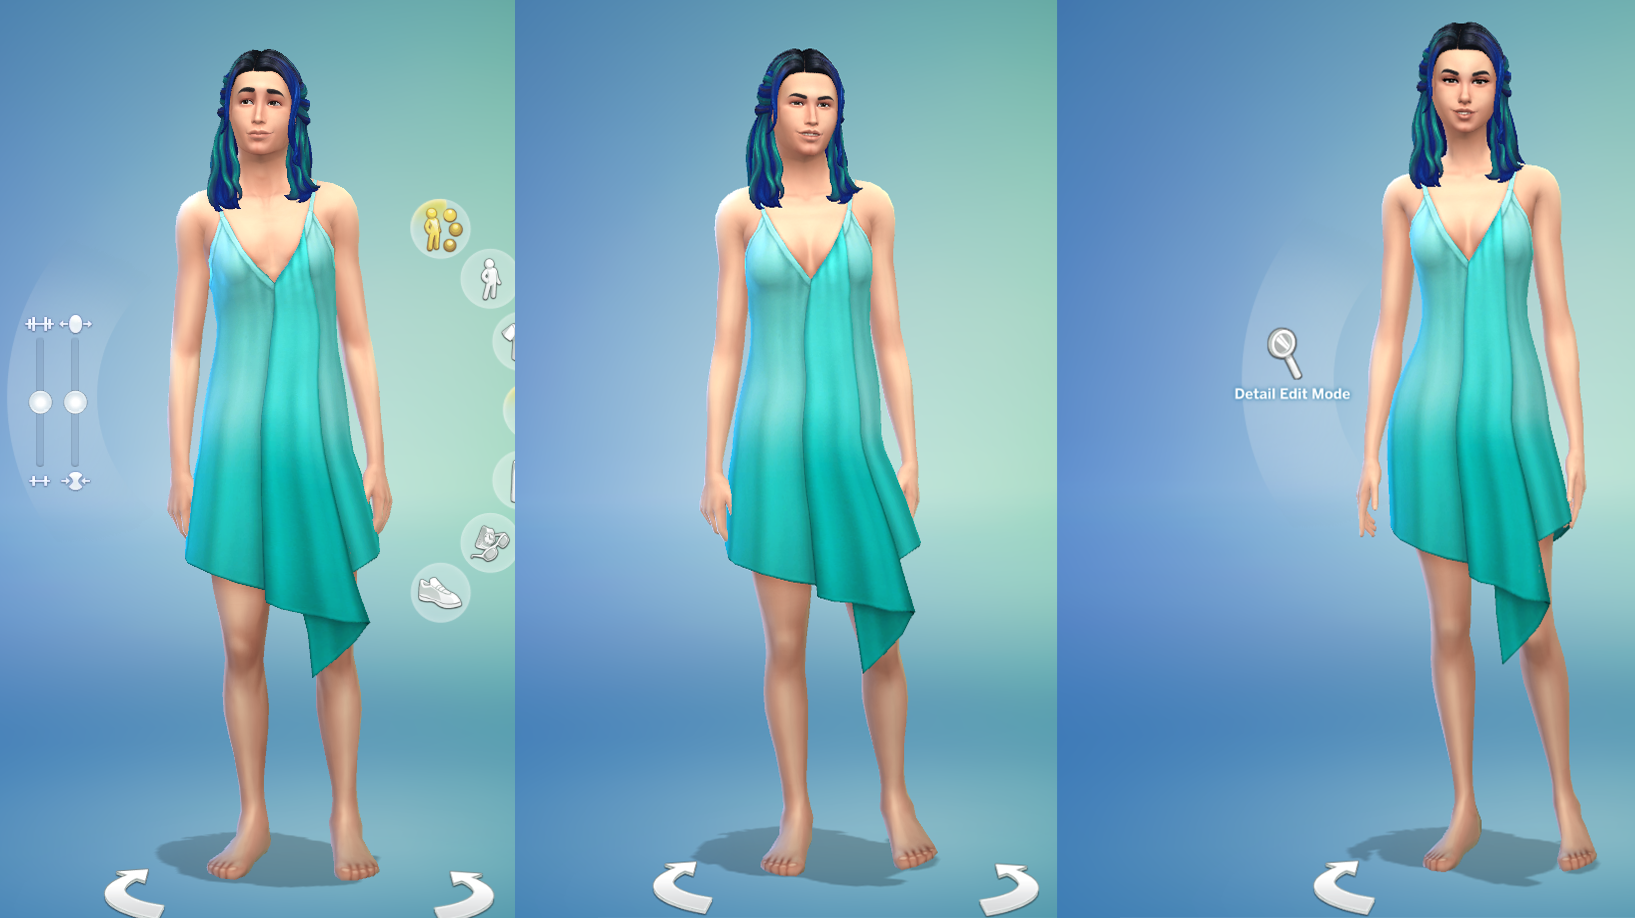 The Sims 4 gets features for transgender people and those with